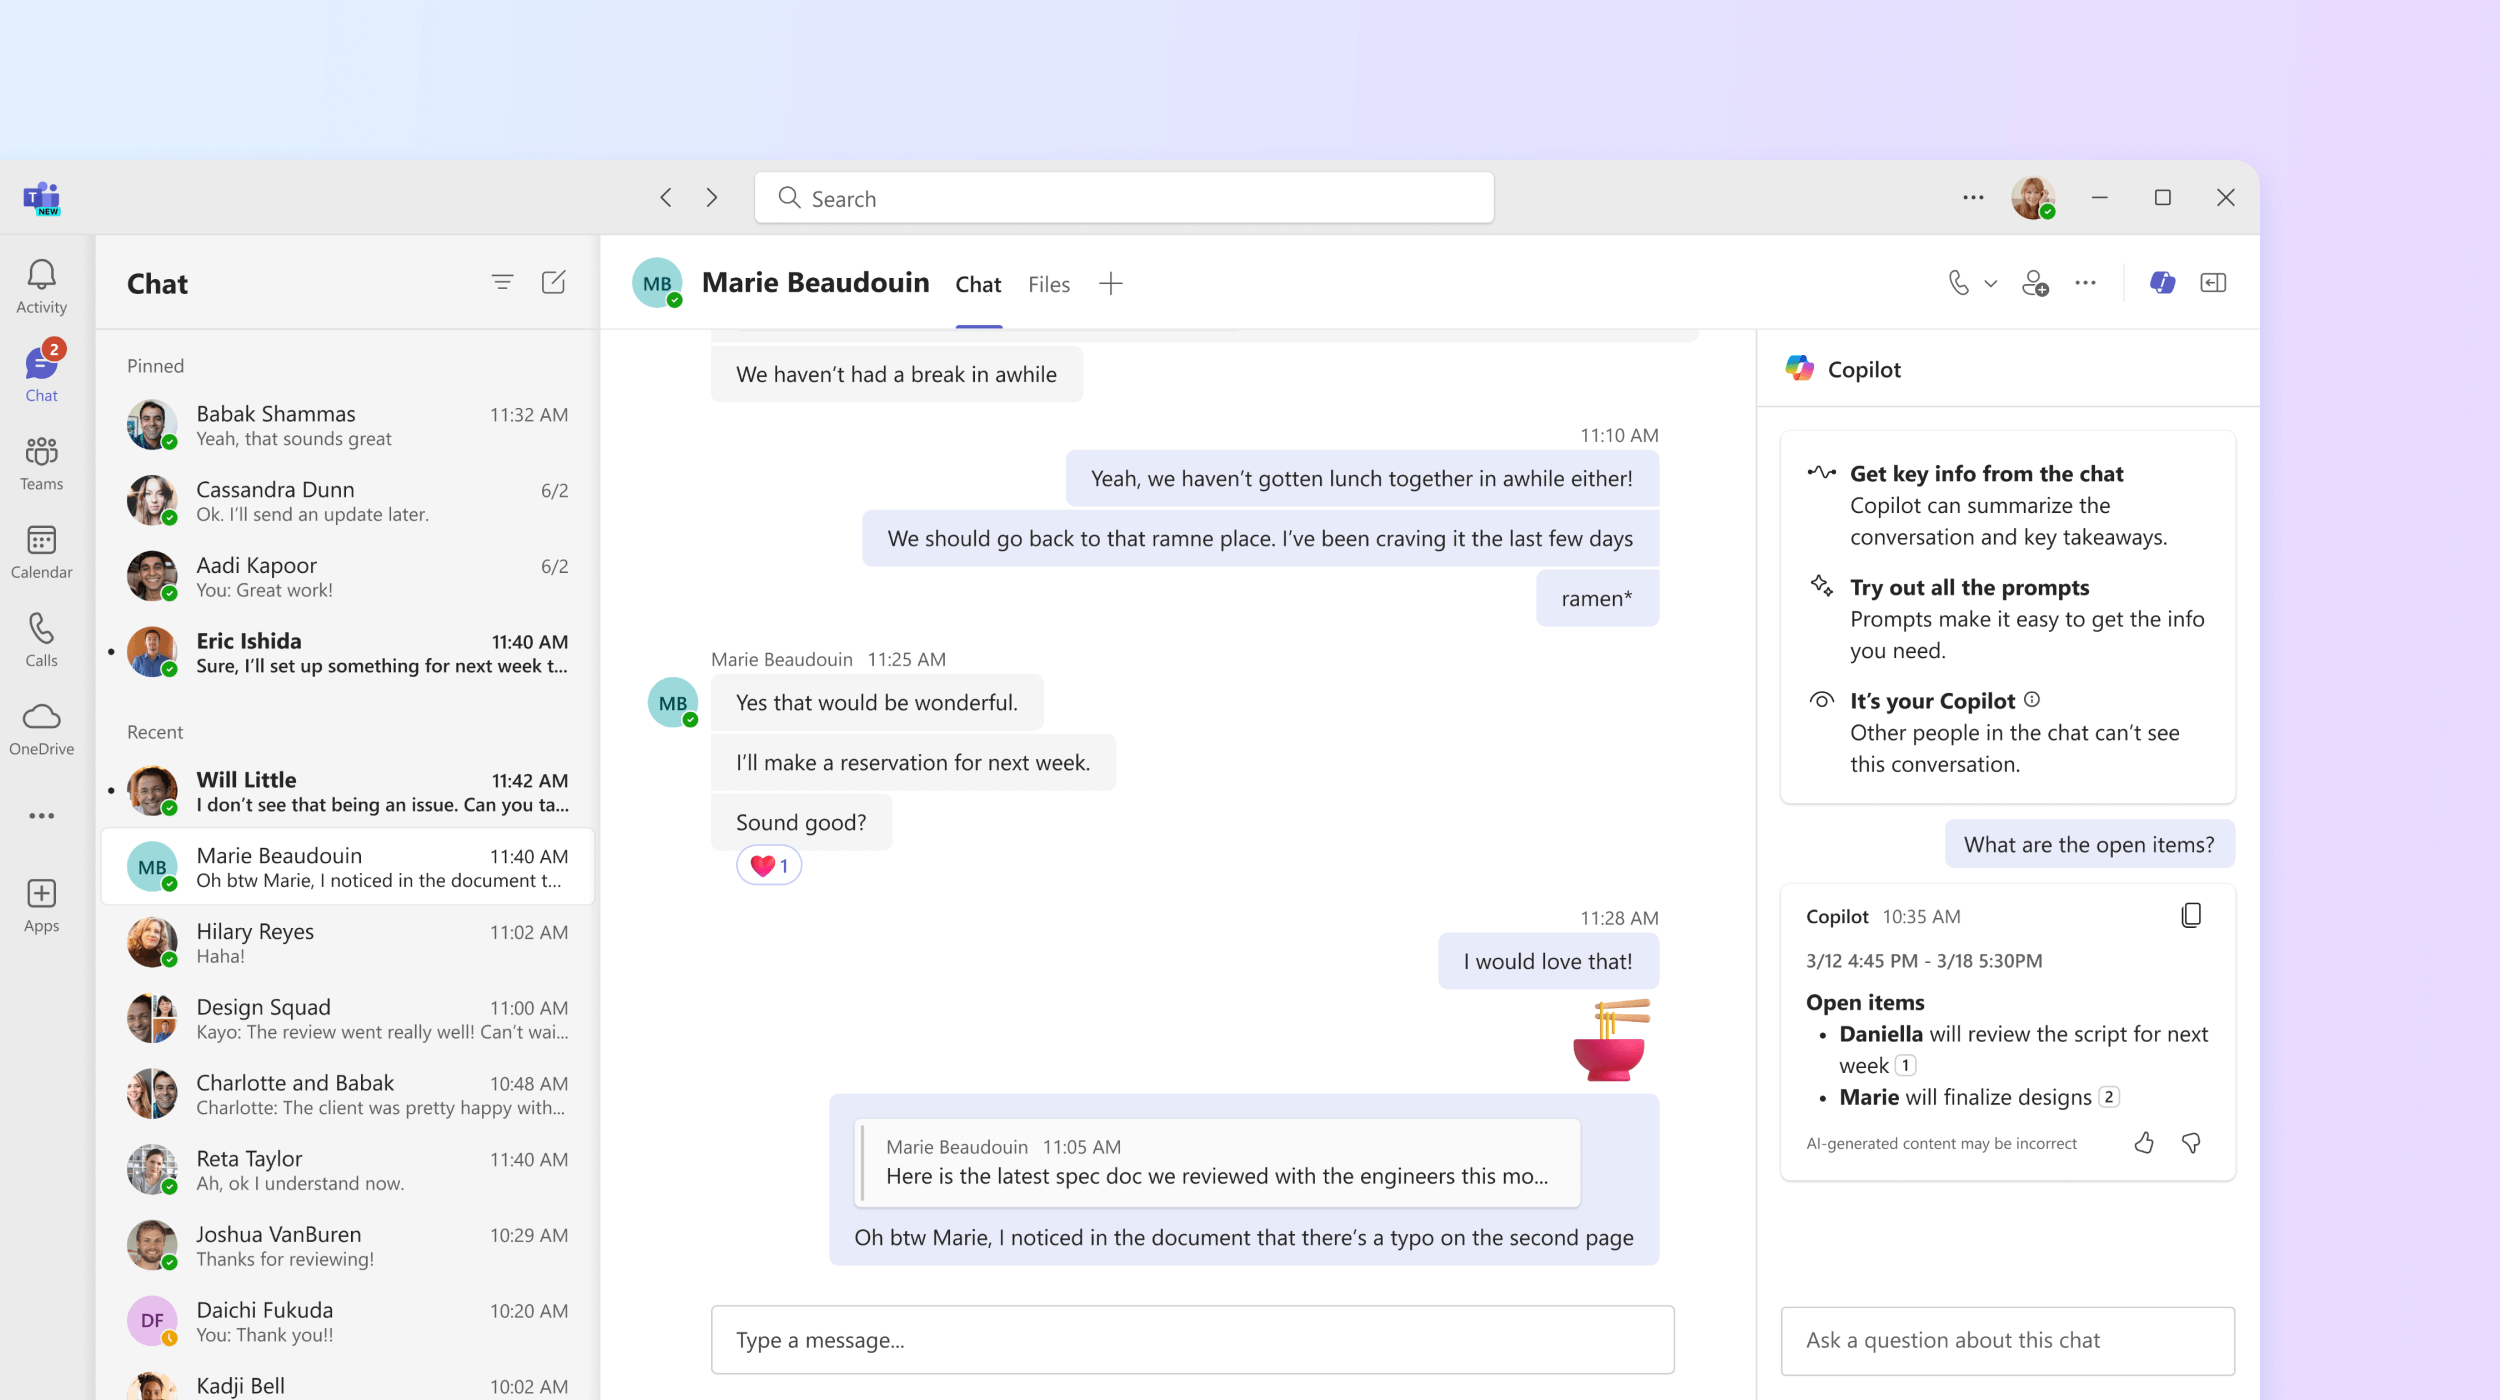 Screenshot shows Copilot in Teams chat answering a question about the open items from the meeting.